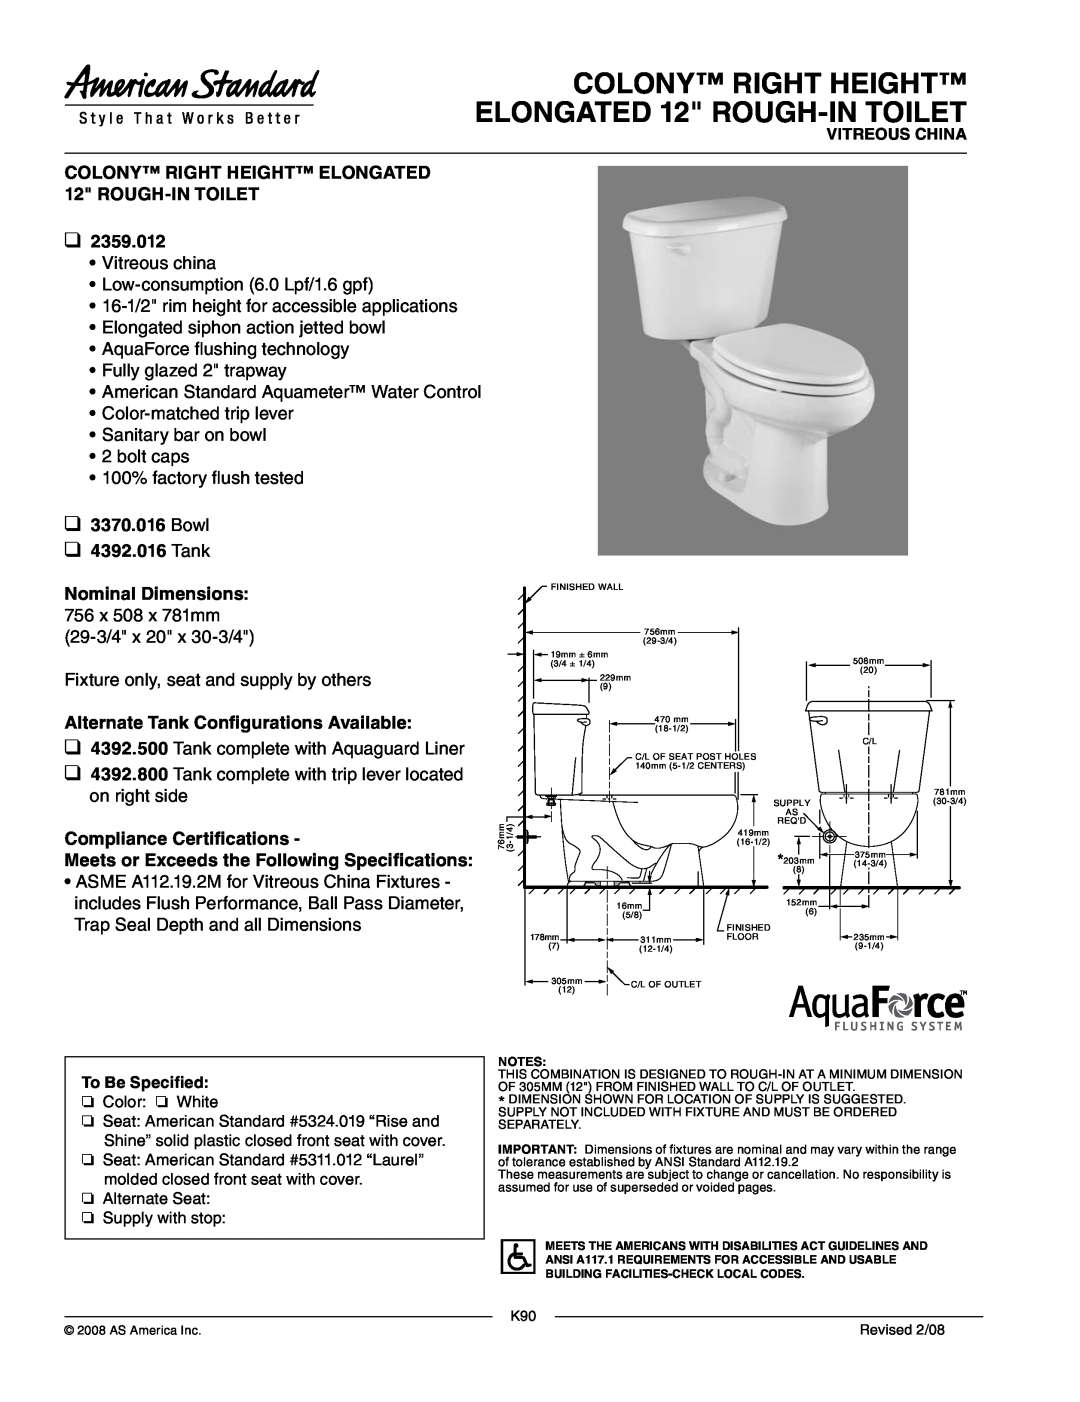 American Standard 2359.012 dimensions COLONY RIGHT HEIGHT ELONGATED 12 ROUGH-INTOILET, Bowl 4392.016 Tank 